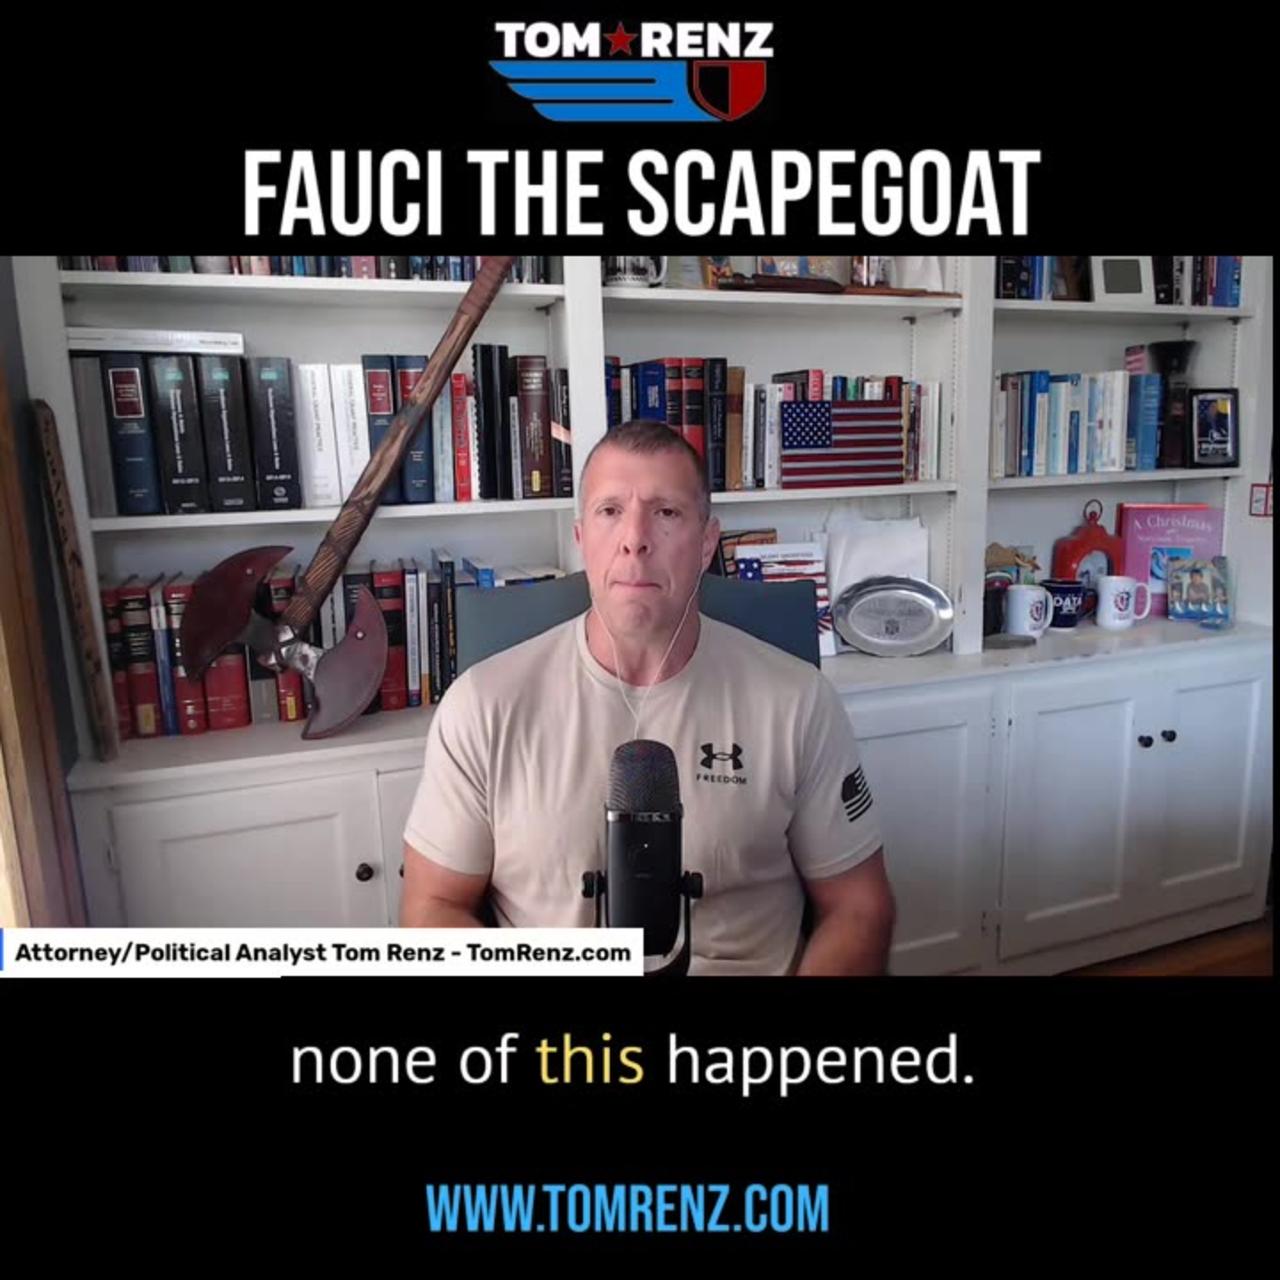 Fauci the Scapegoat - The Tom Renz Show